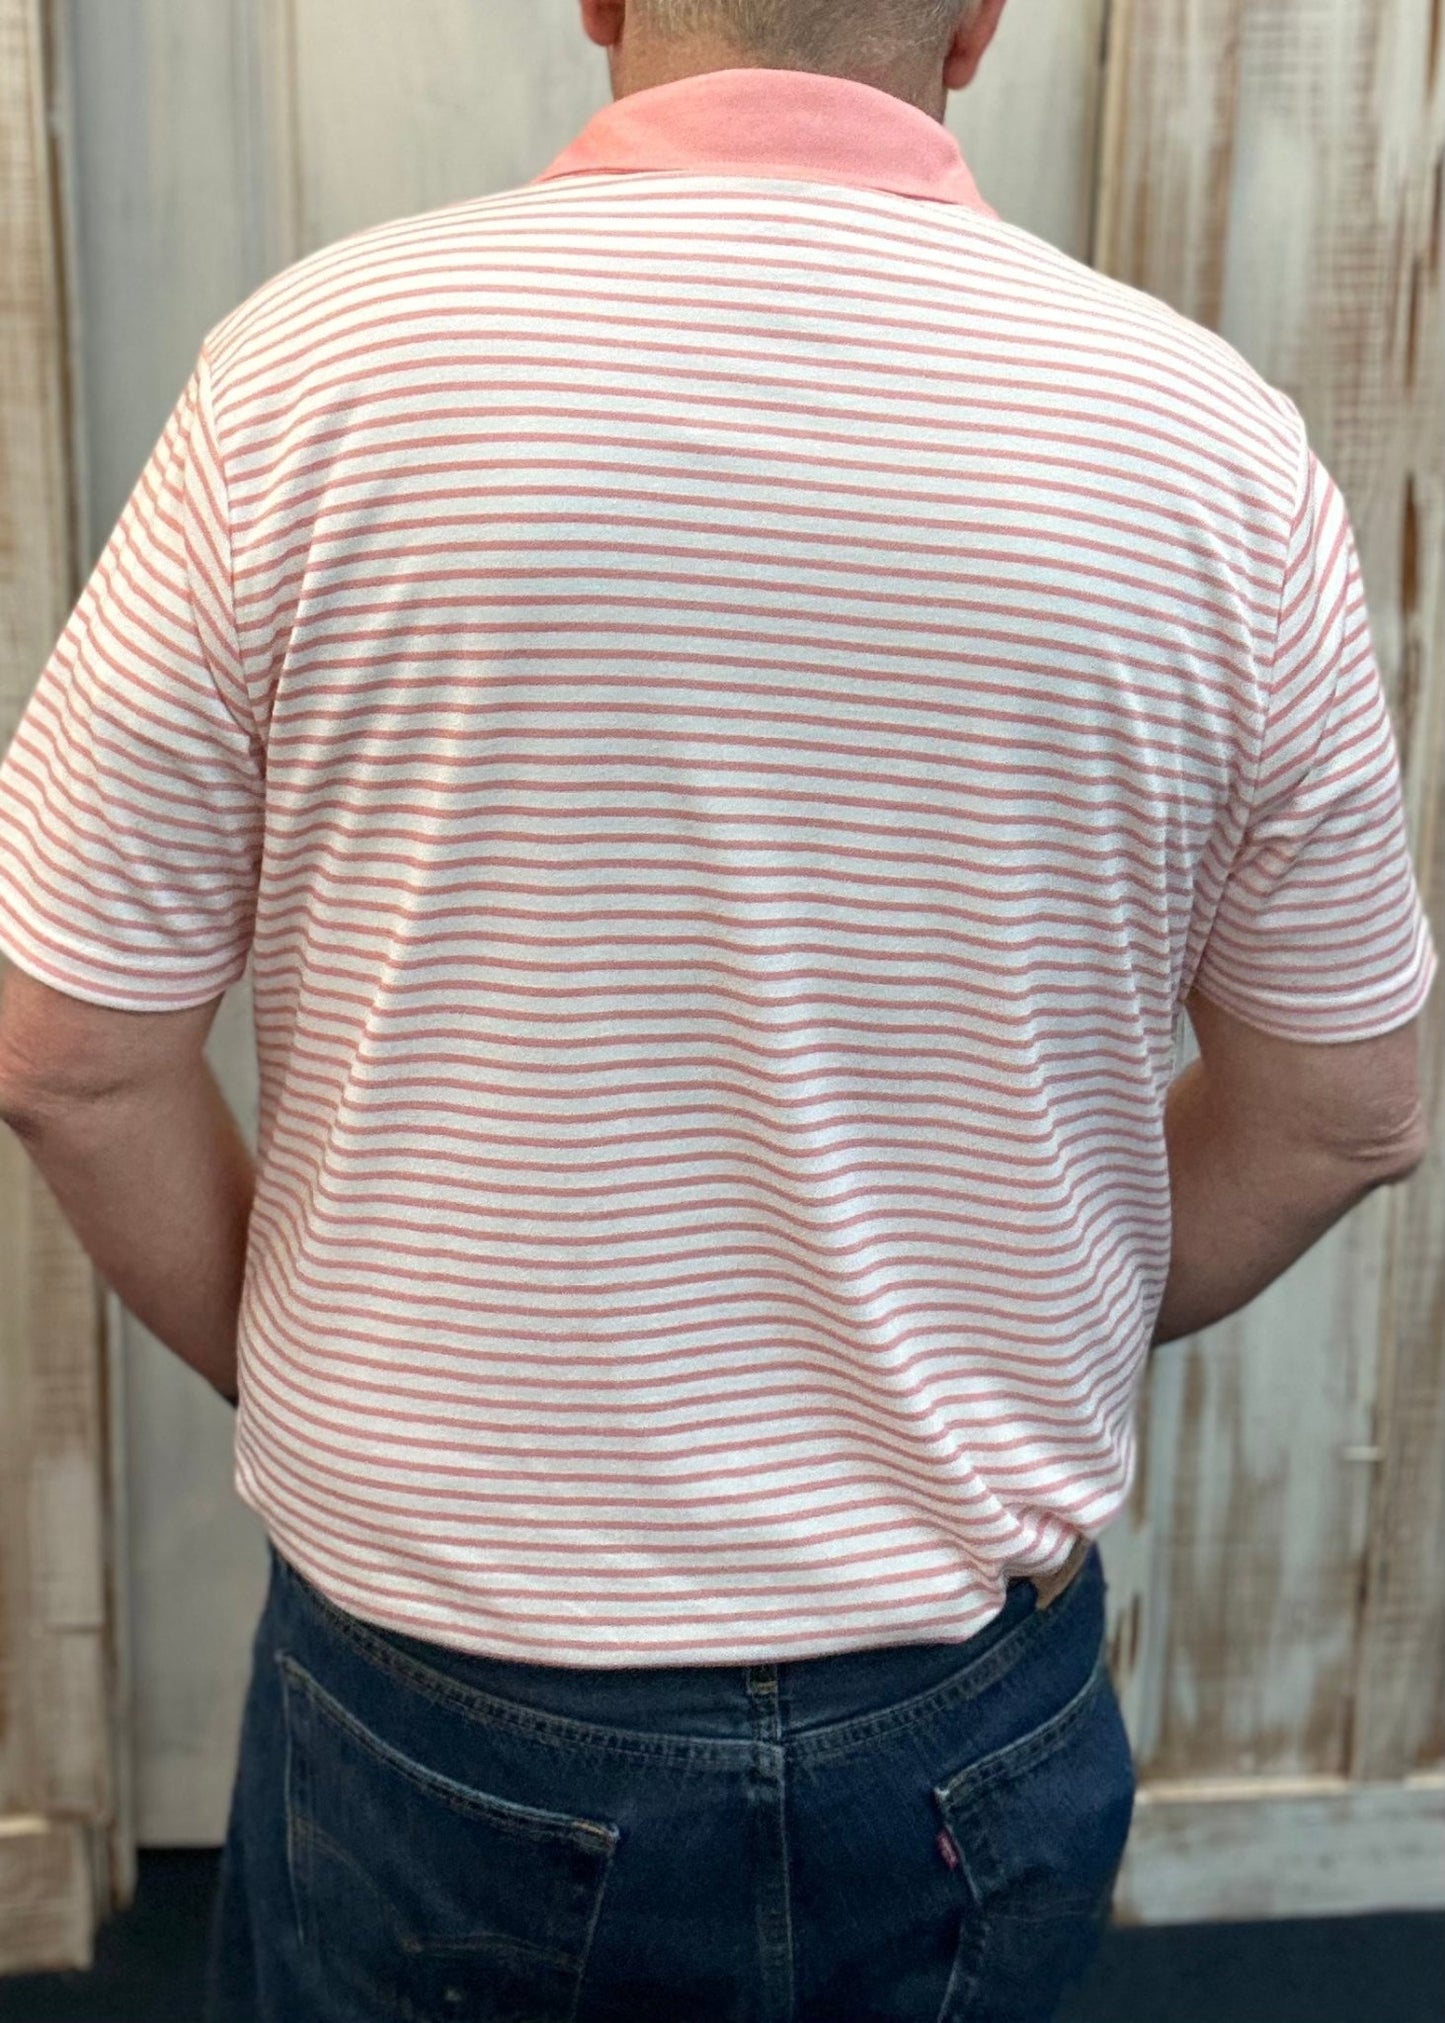 Southern Marsh Albany Flats Stripe Polo - Coral - Jimberly's Boutique